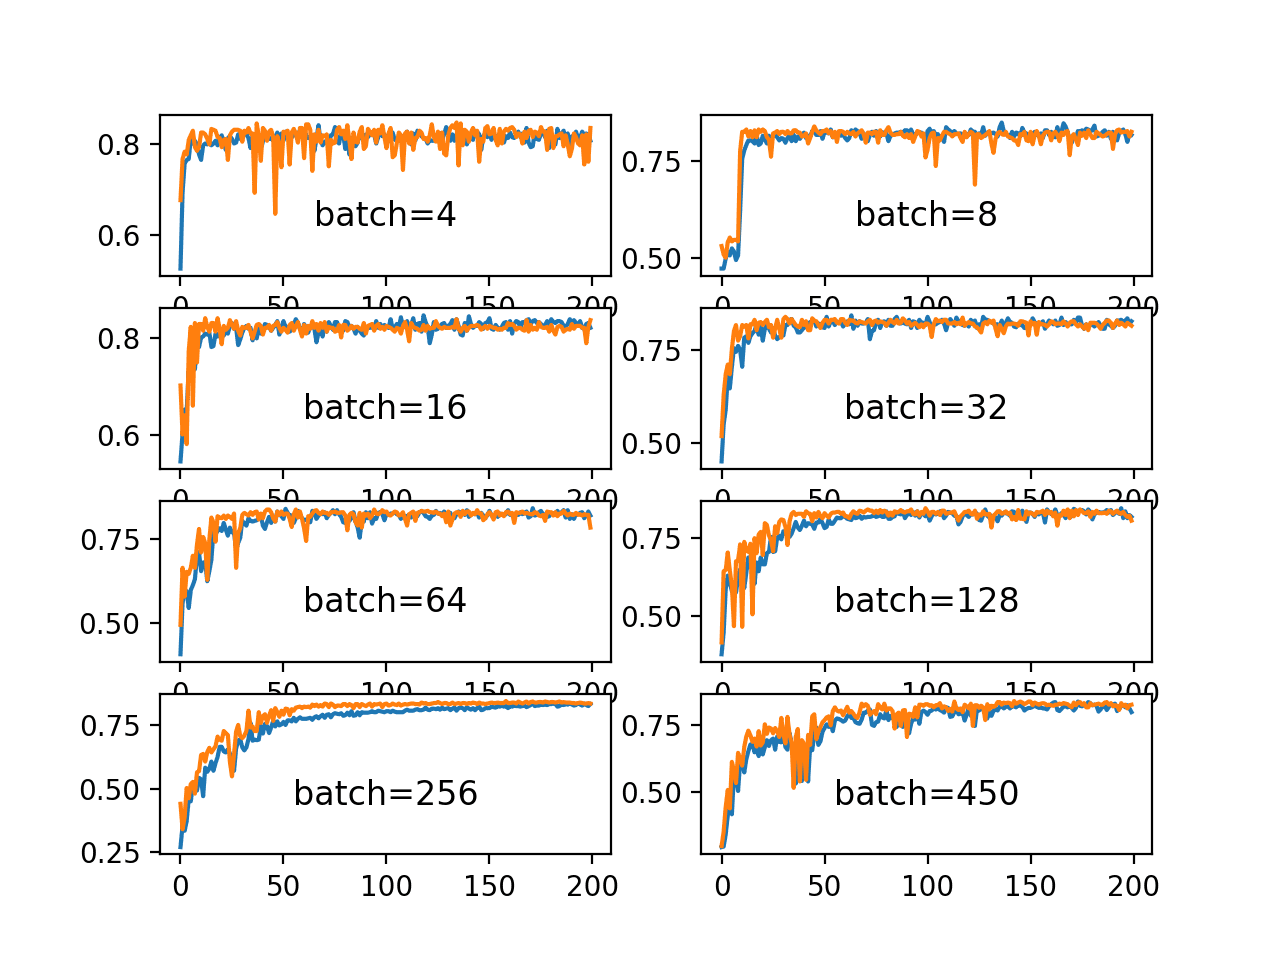 Line Plots of Classification Accuracy on Train and Test Datasets With Different Batch Sizes